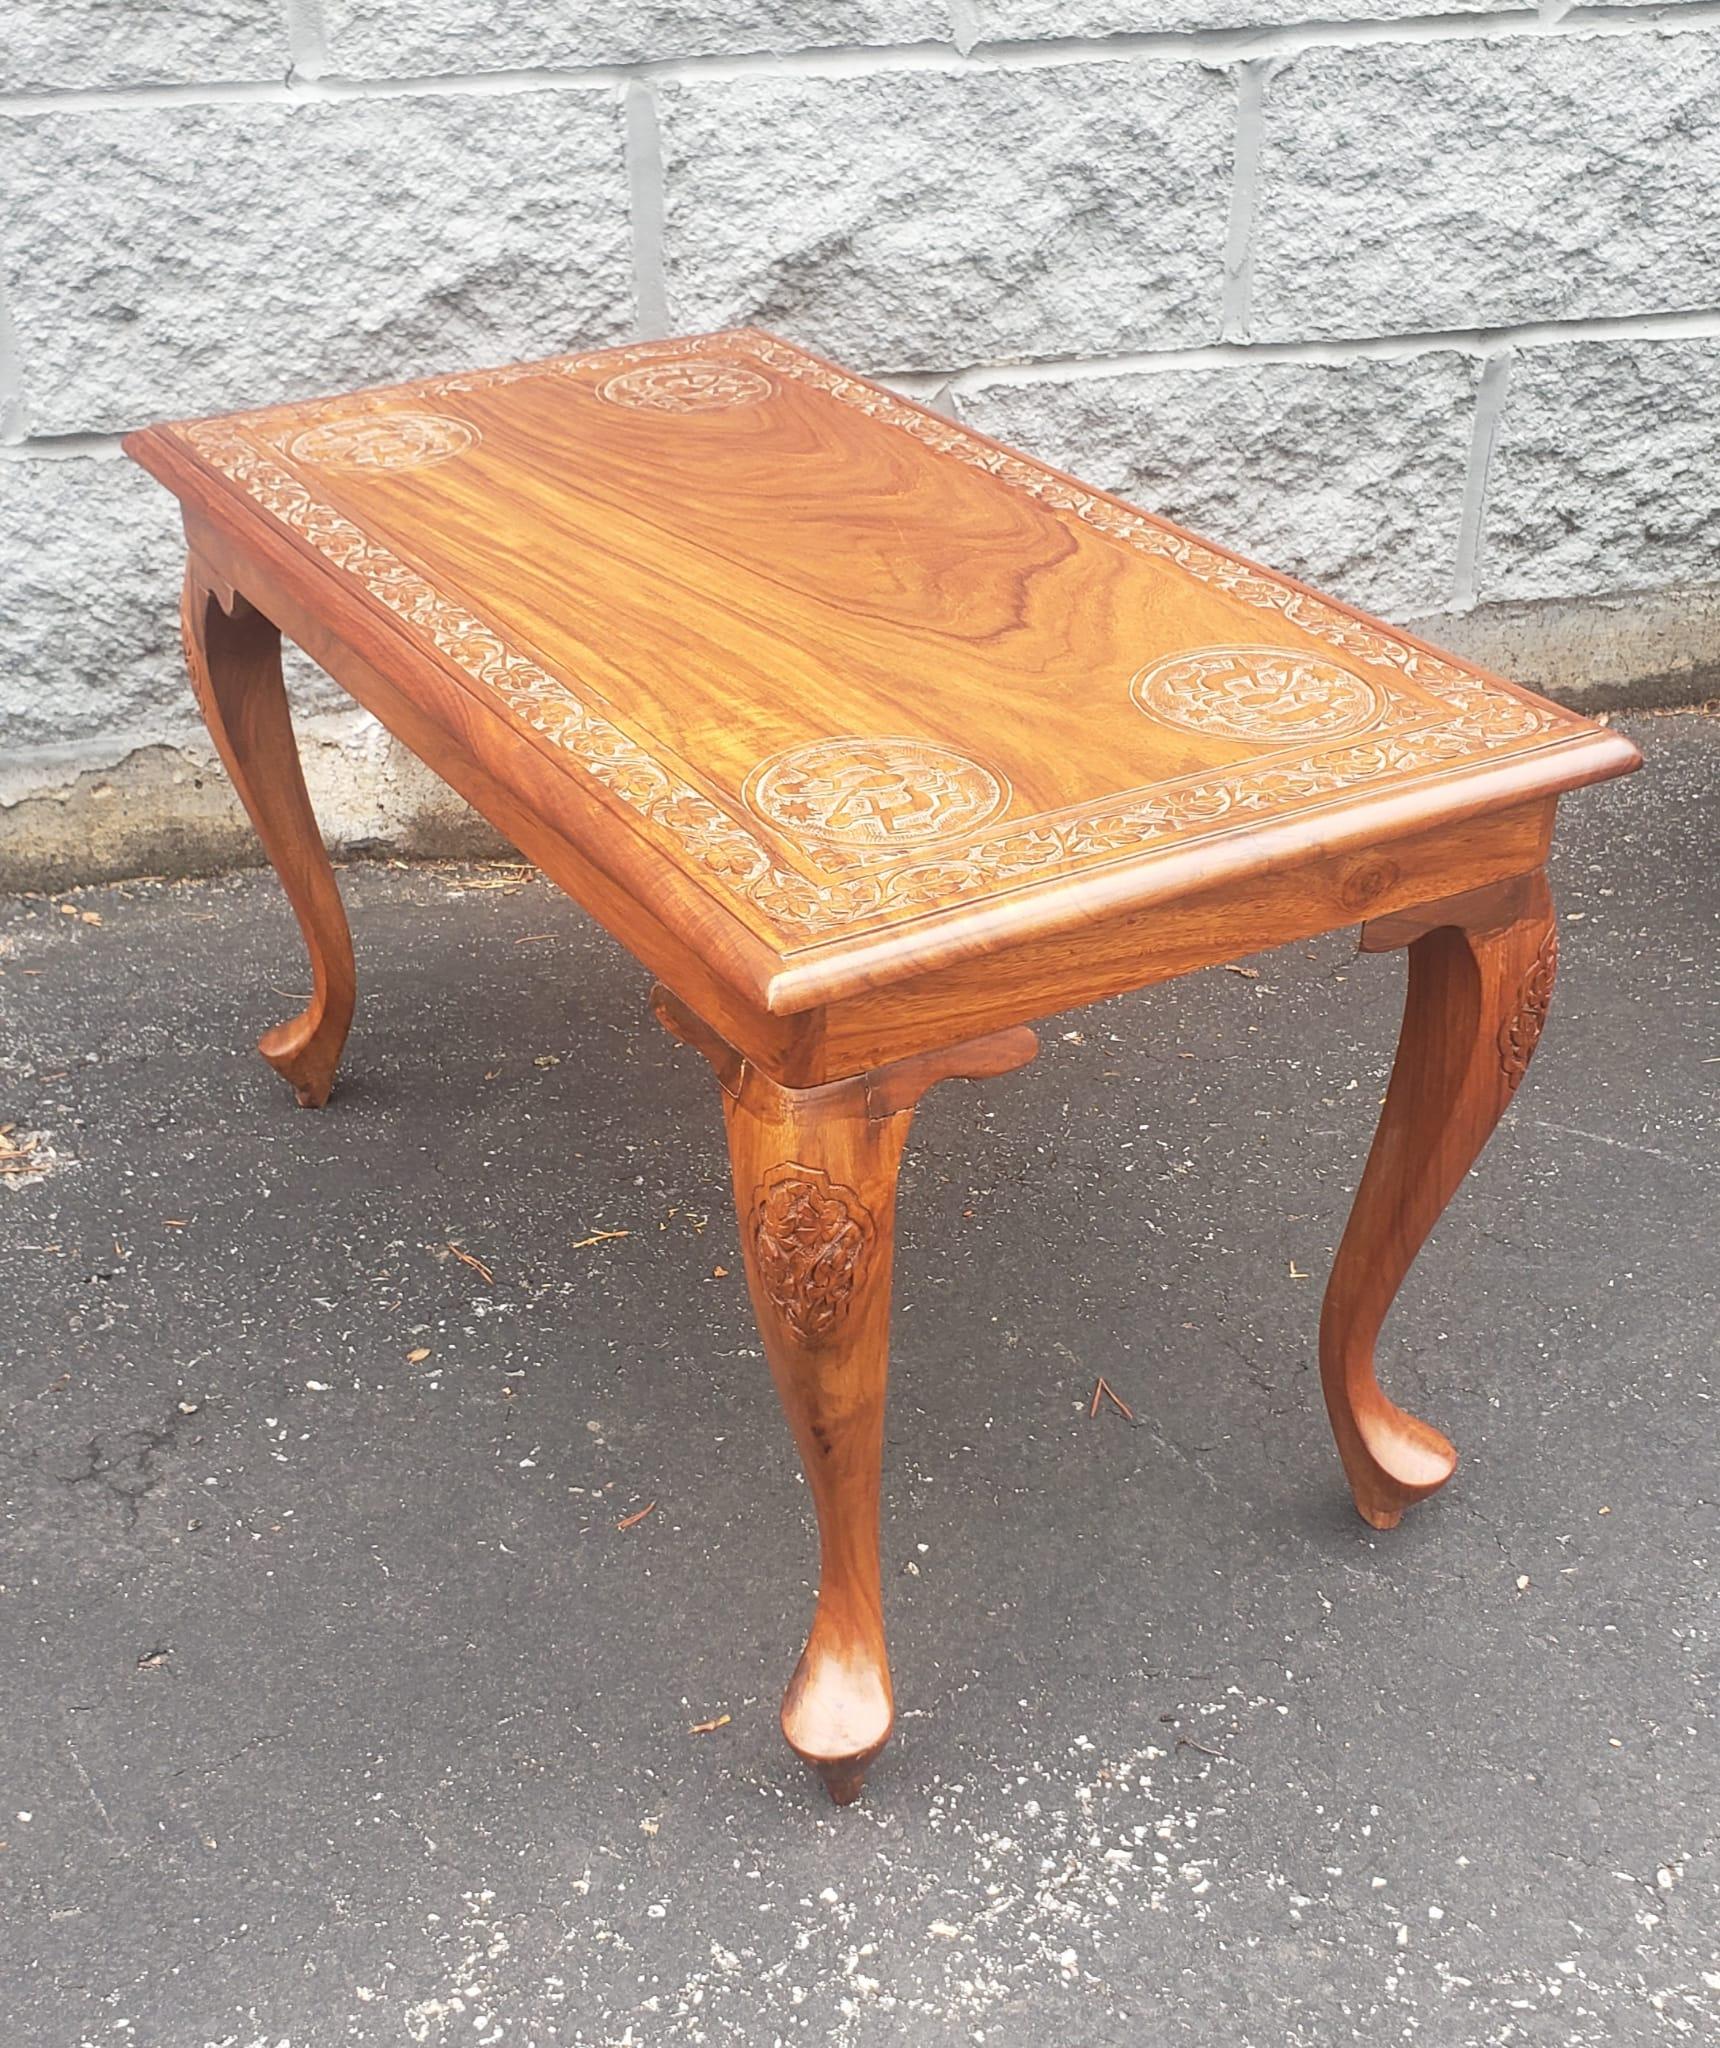 20th Century Midcentury Anglo-Japanese Carved Hardwood Low Side Tables, a Pair For Sale